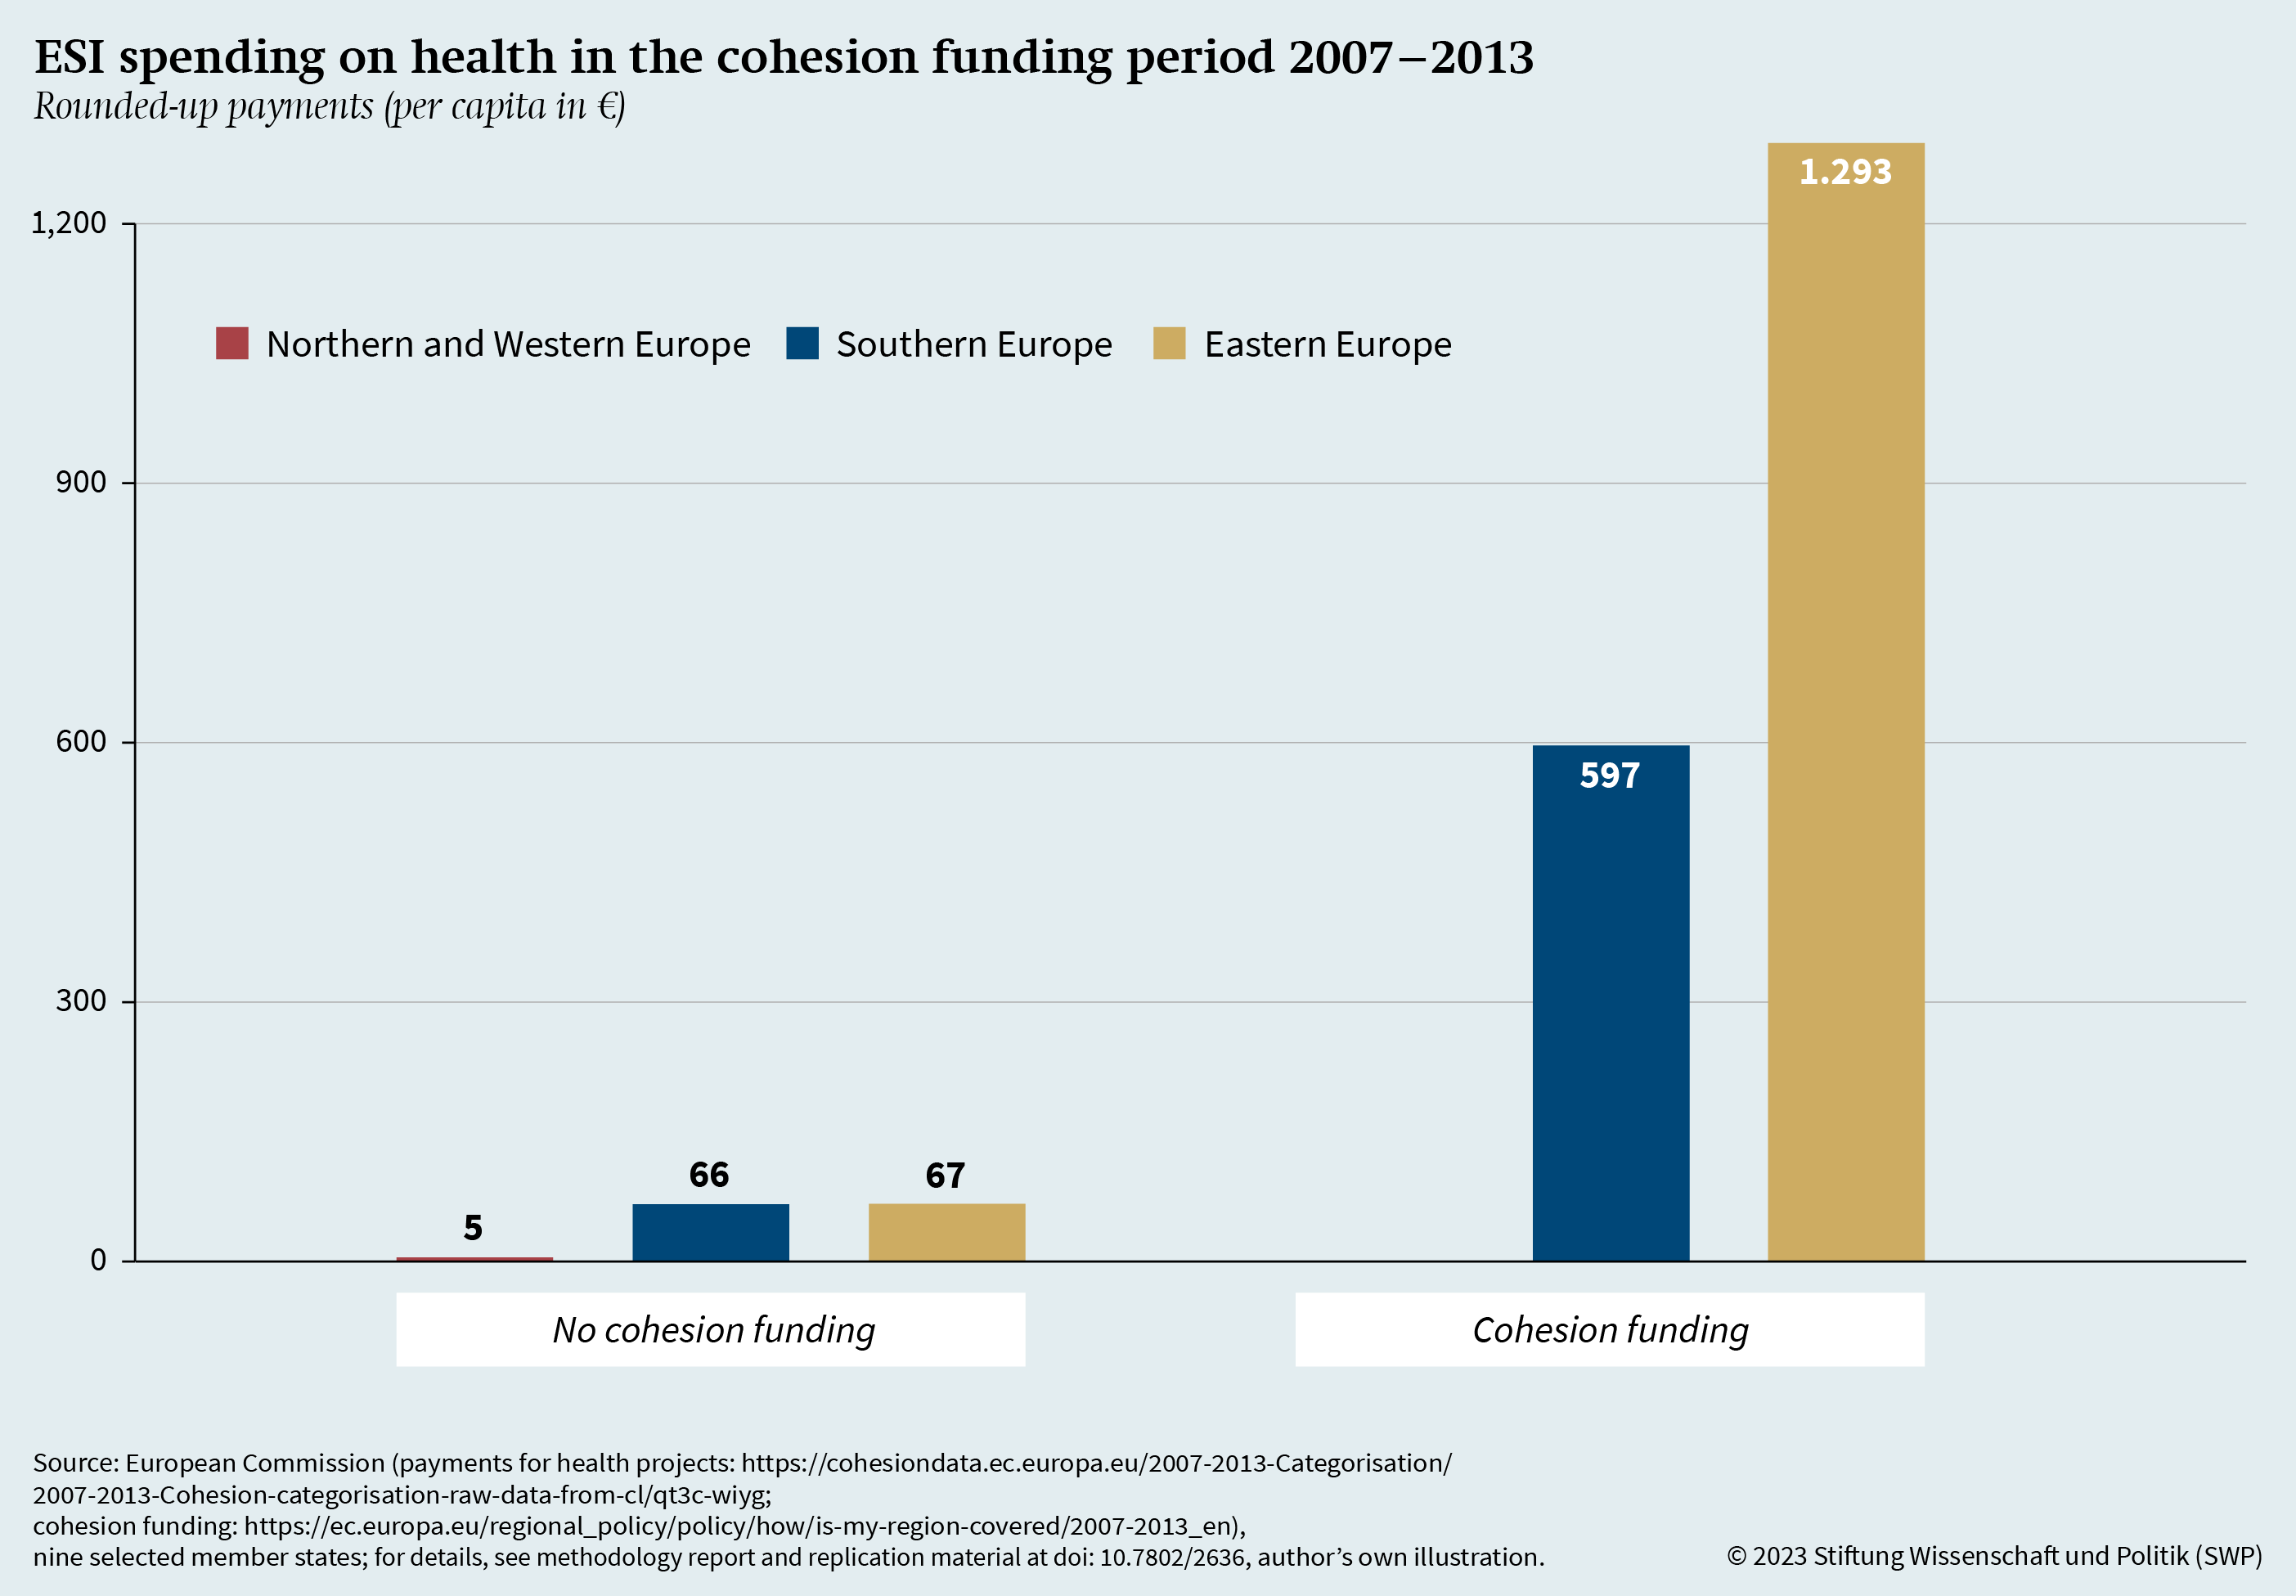 Figure A.4: ESI spending on health in the cohesion funding period 2007-2013